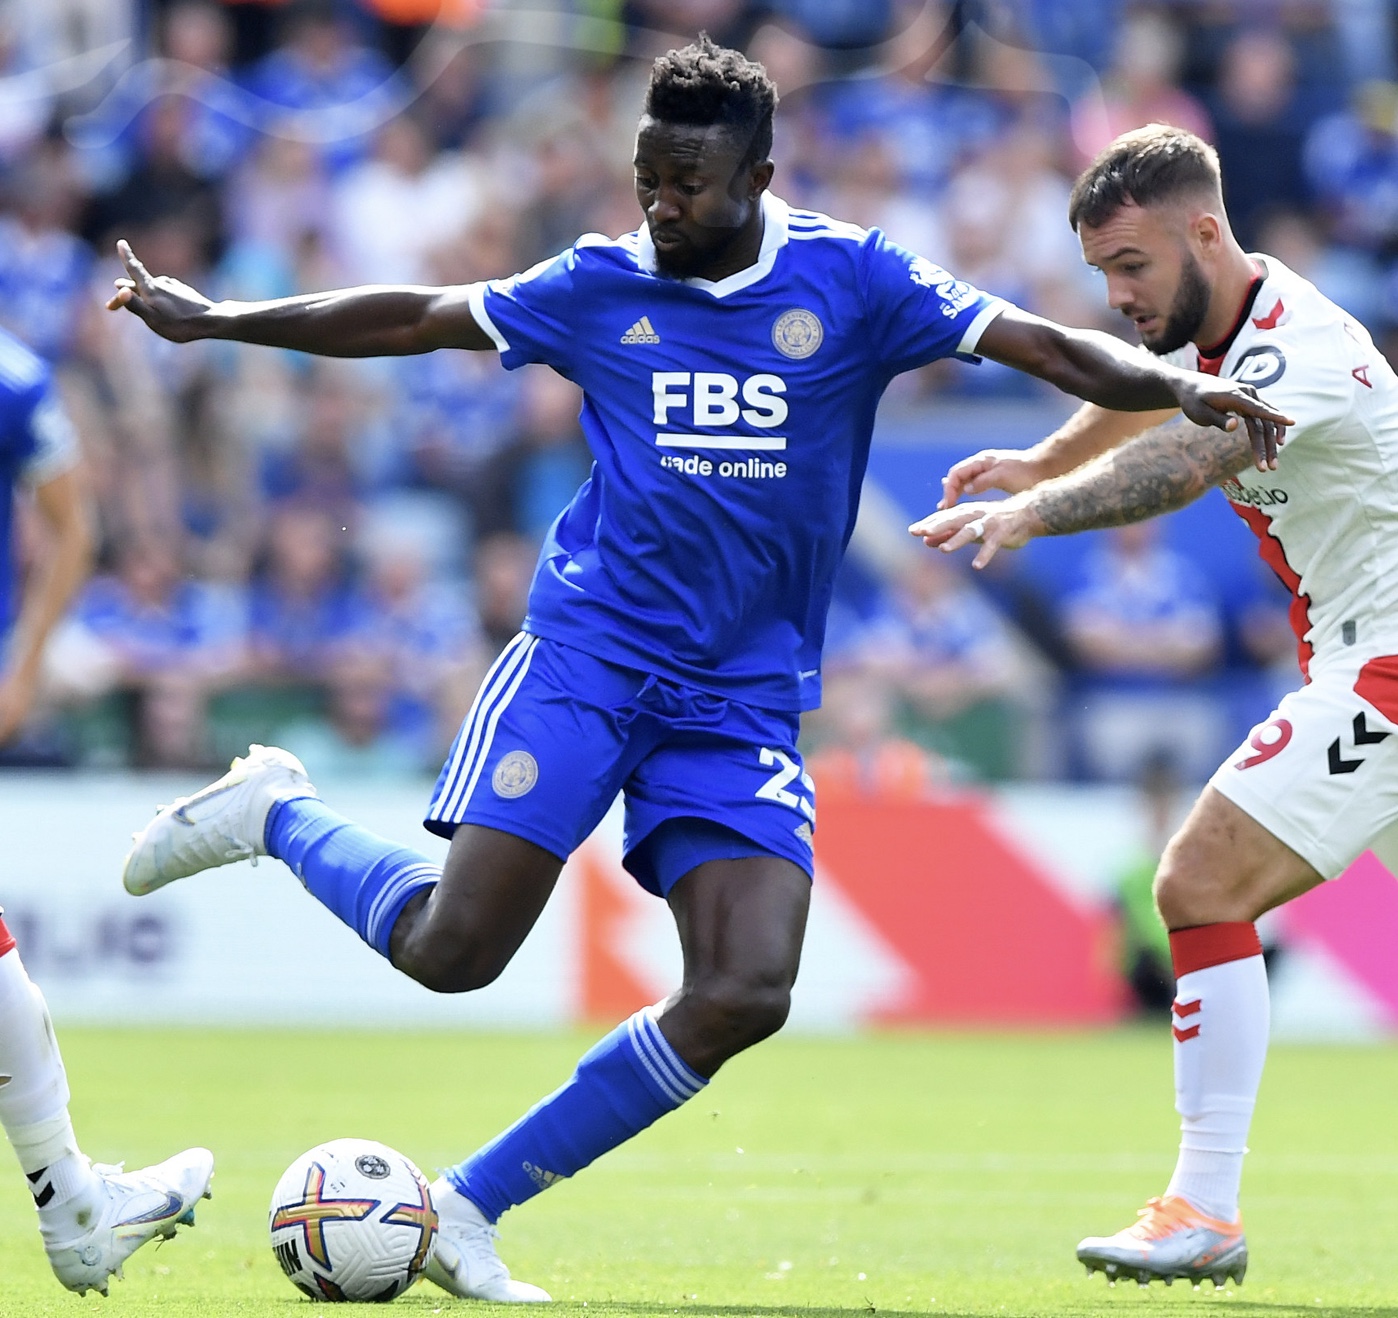 Aribo, Ndidi, Iheanacho In Action As Southampton Beat Leicester To Claim First Win Of Season